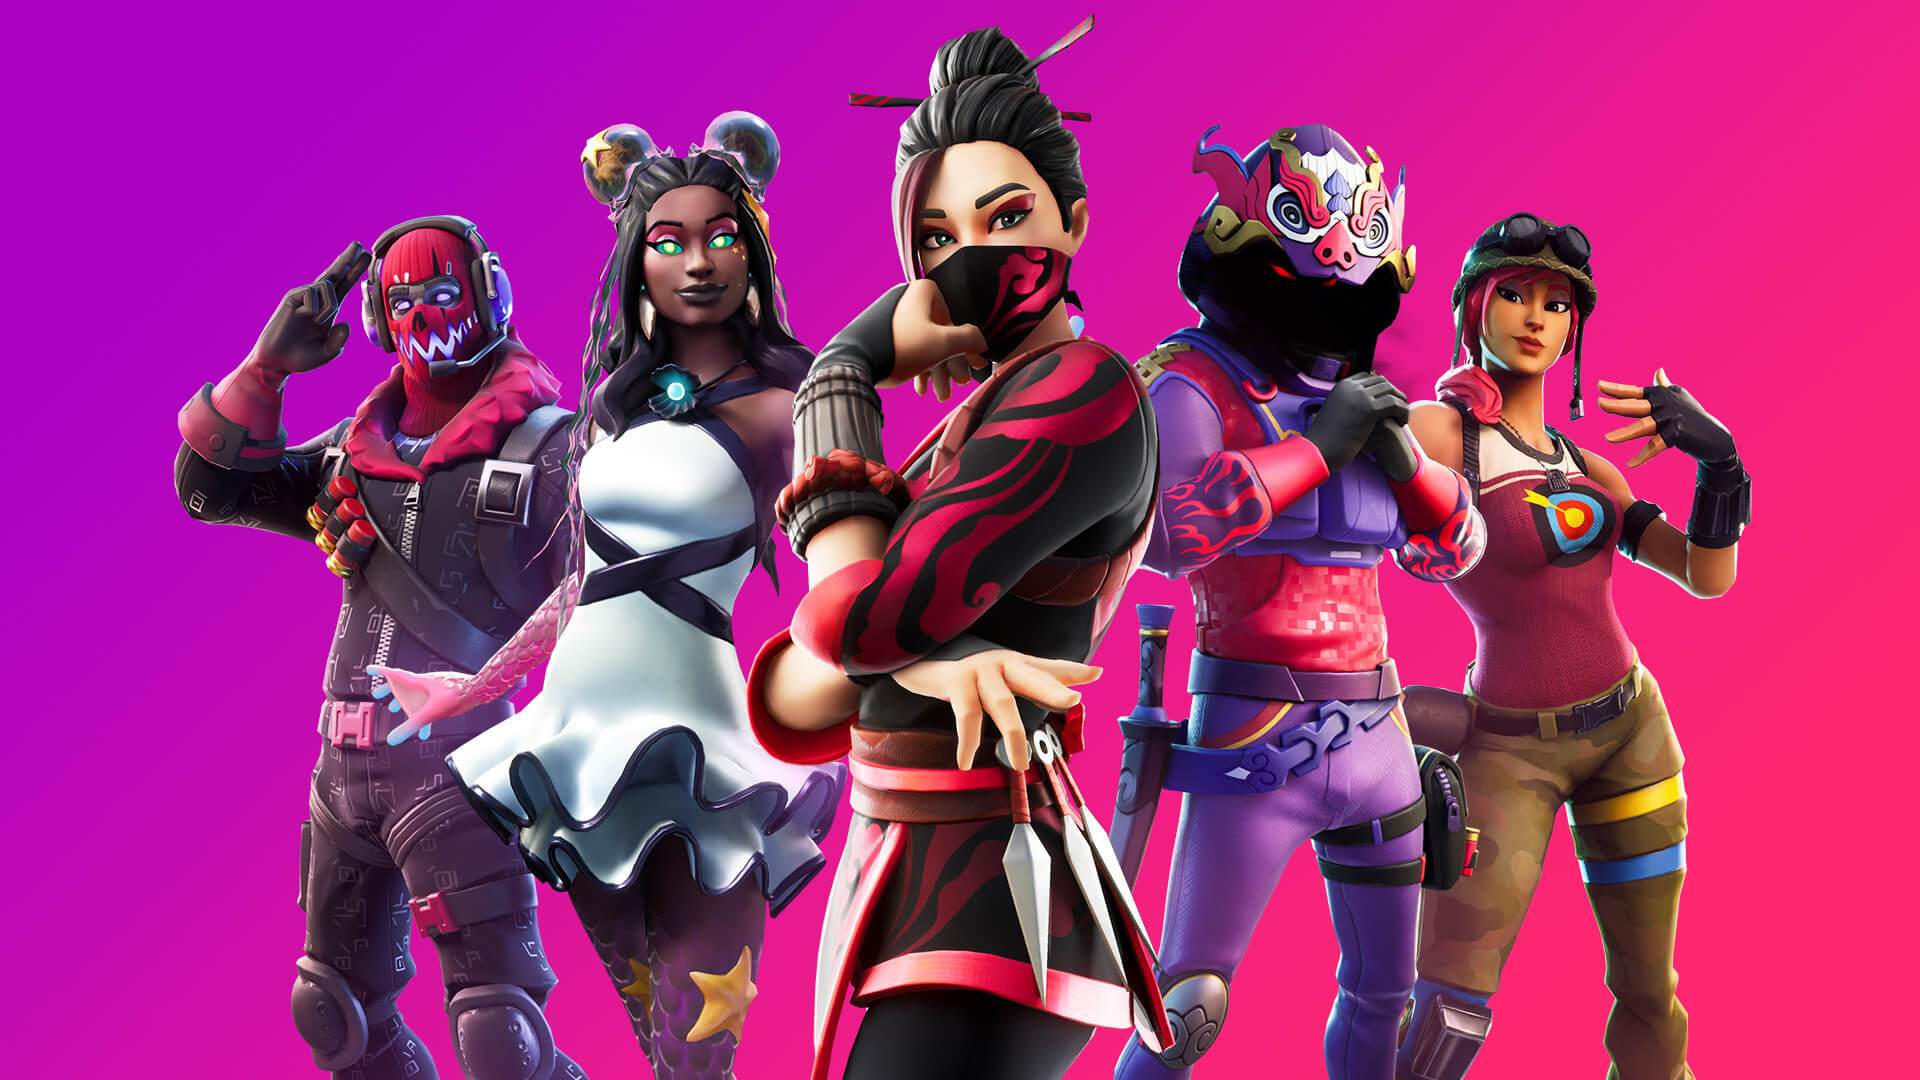  Epic says no in-person Fortnite in 2021 